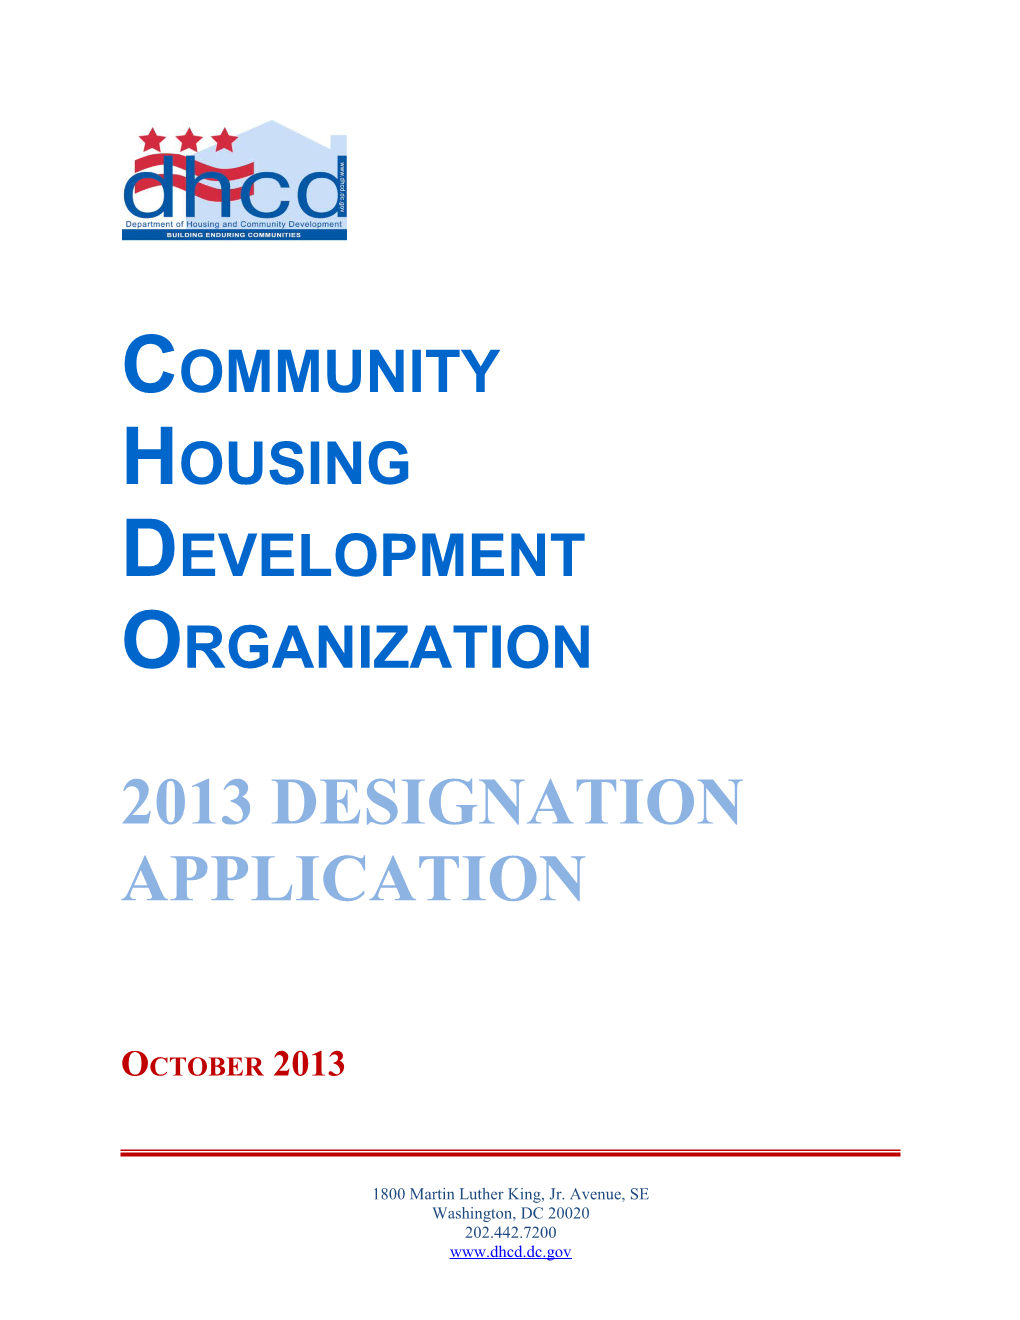 Department of Housing and Community Development (DHCD)